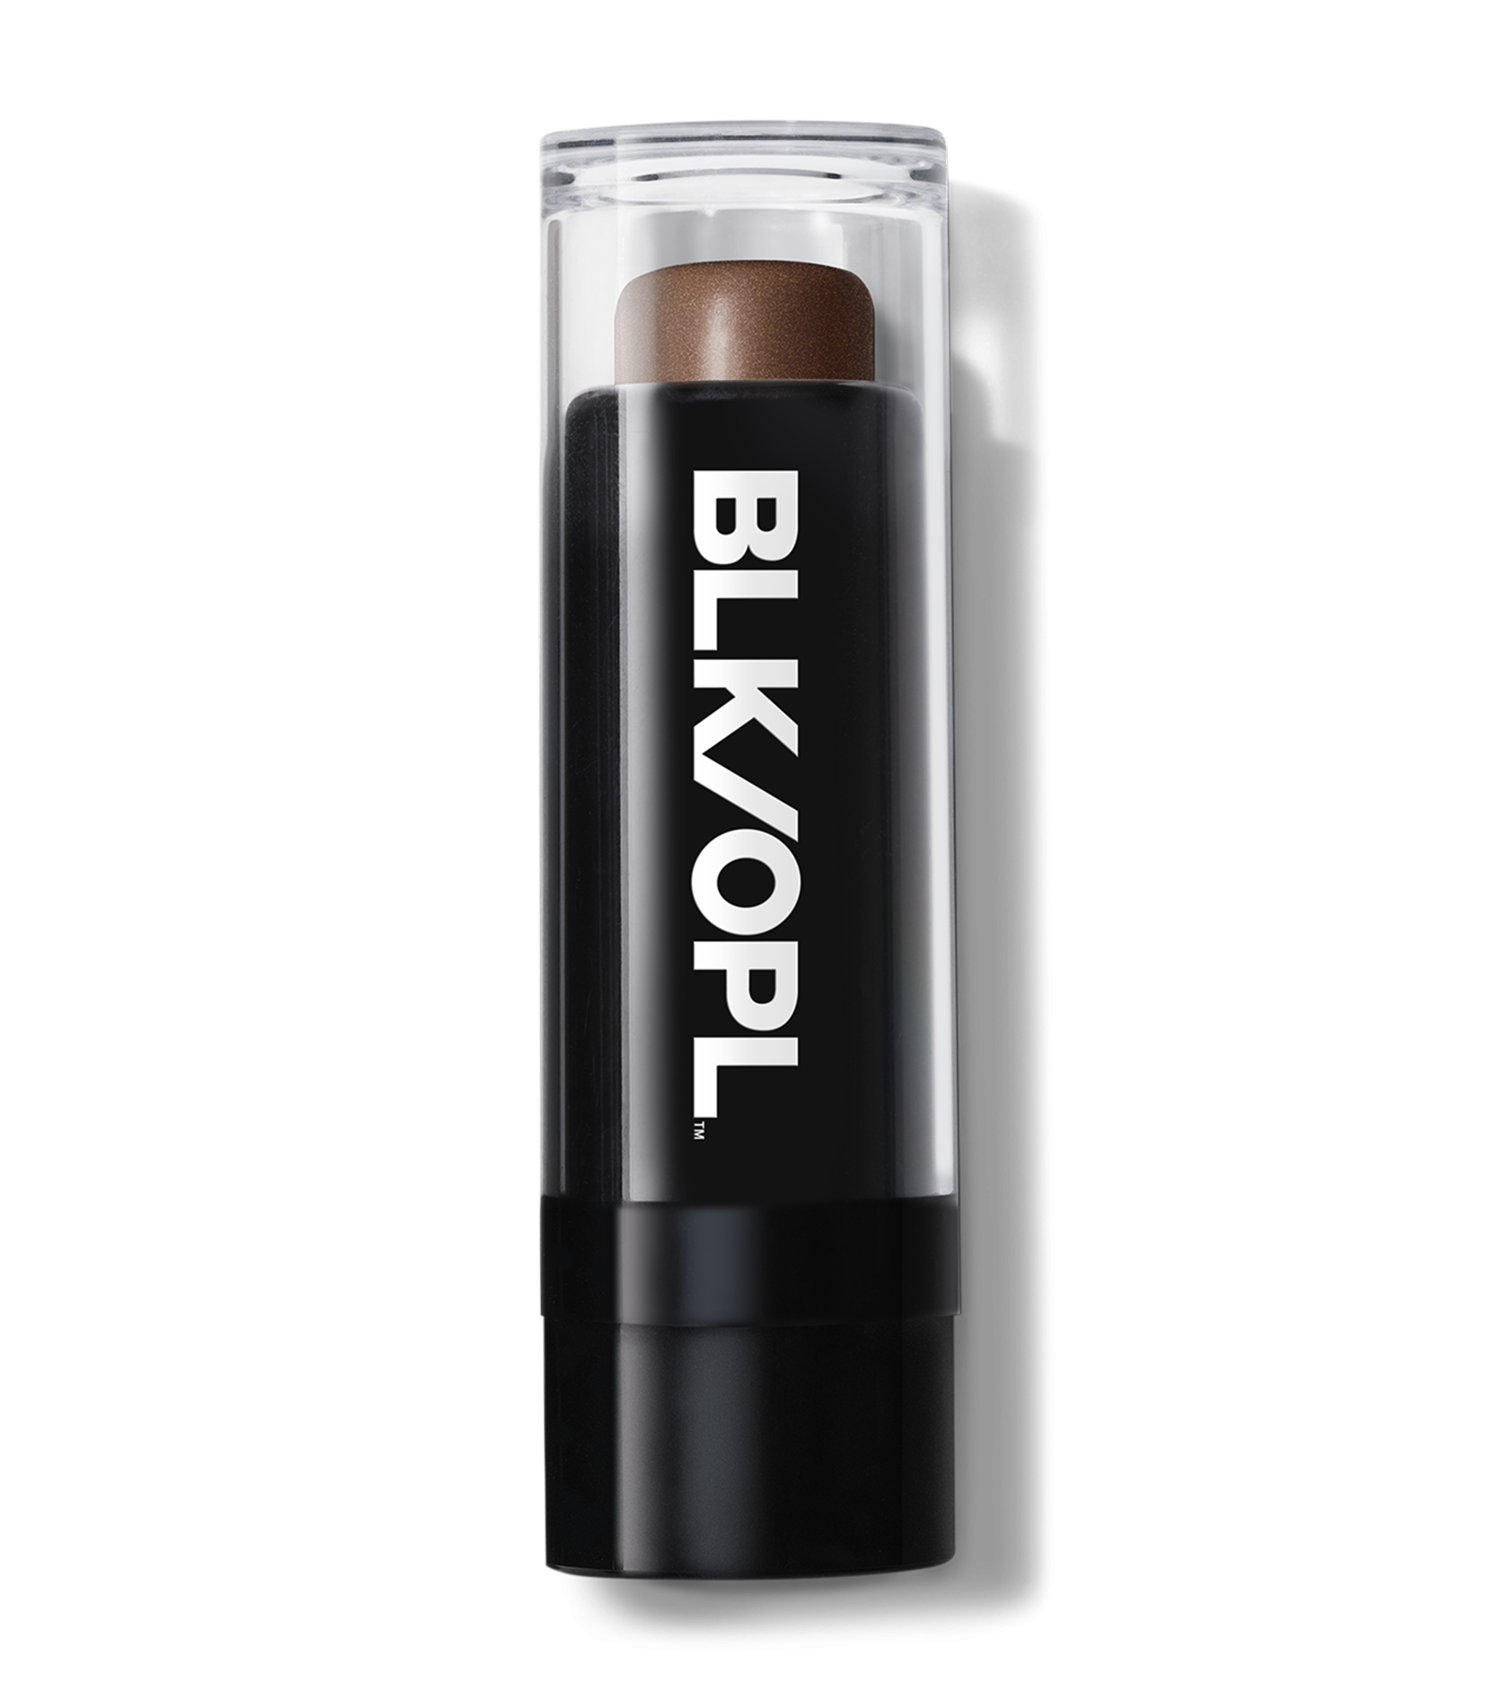 BLK/OPL TRUE COLOR® Illuminating Stick for Eyes, Lips, and Face Illuminating Stick - Nude Glow 1